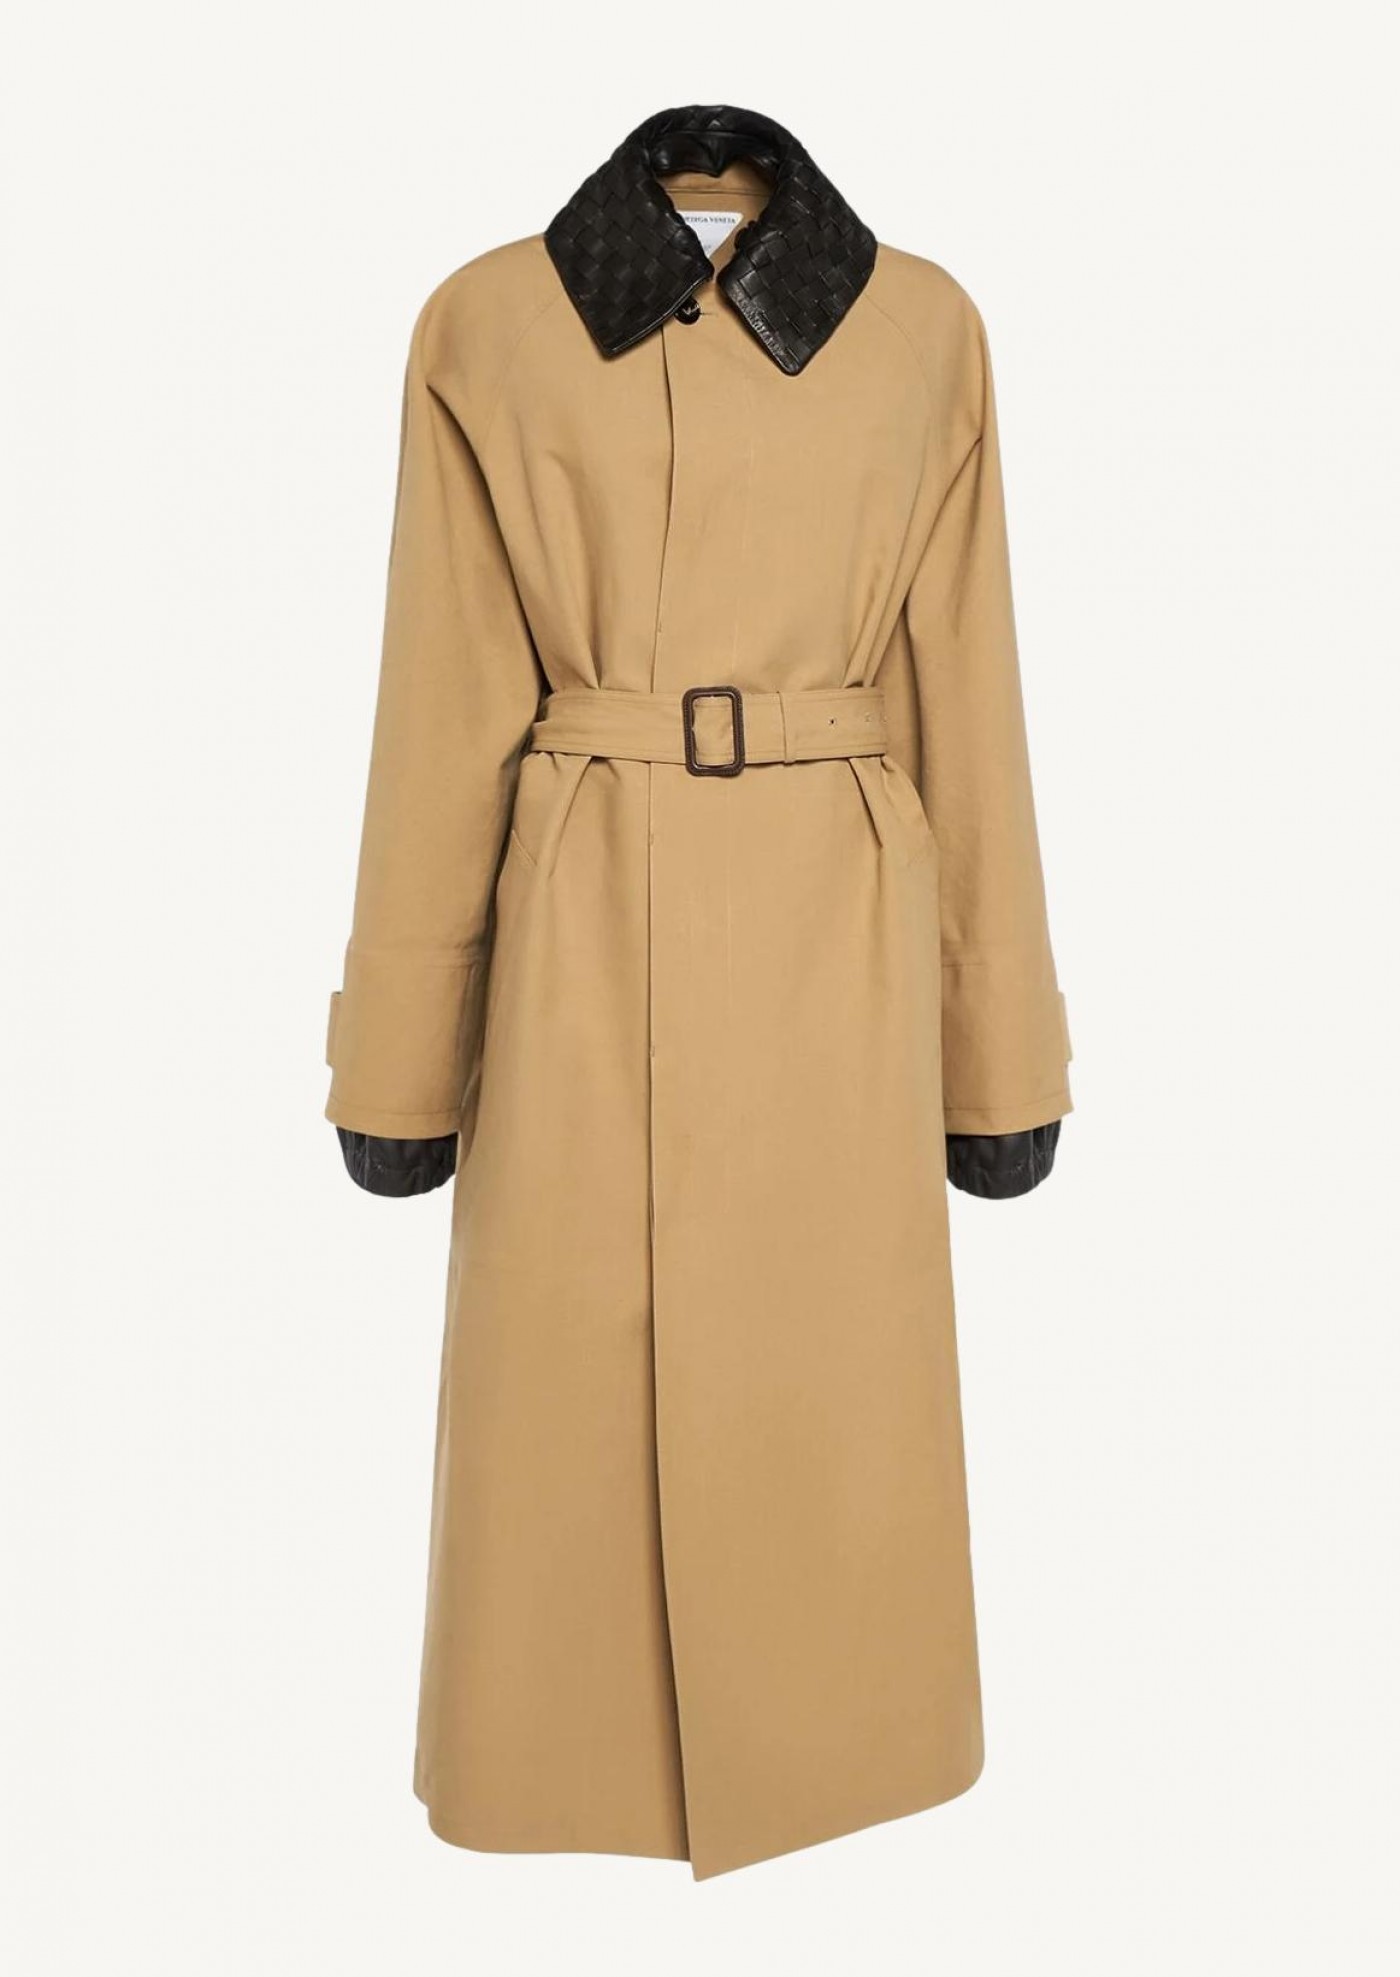 Waterproof stretch cotton trench coat